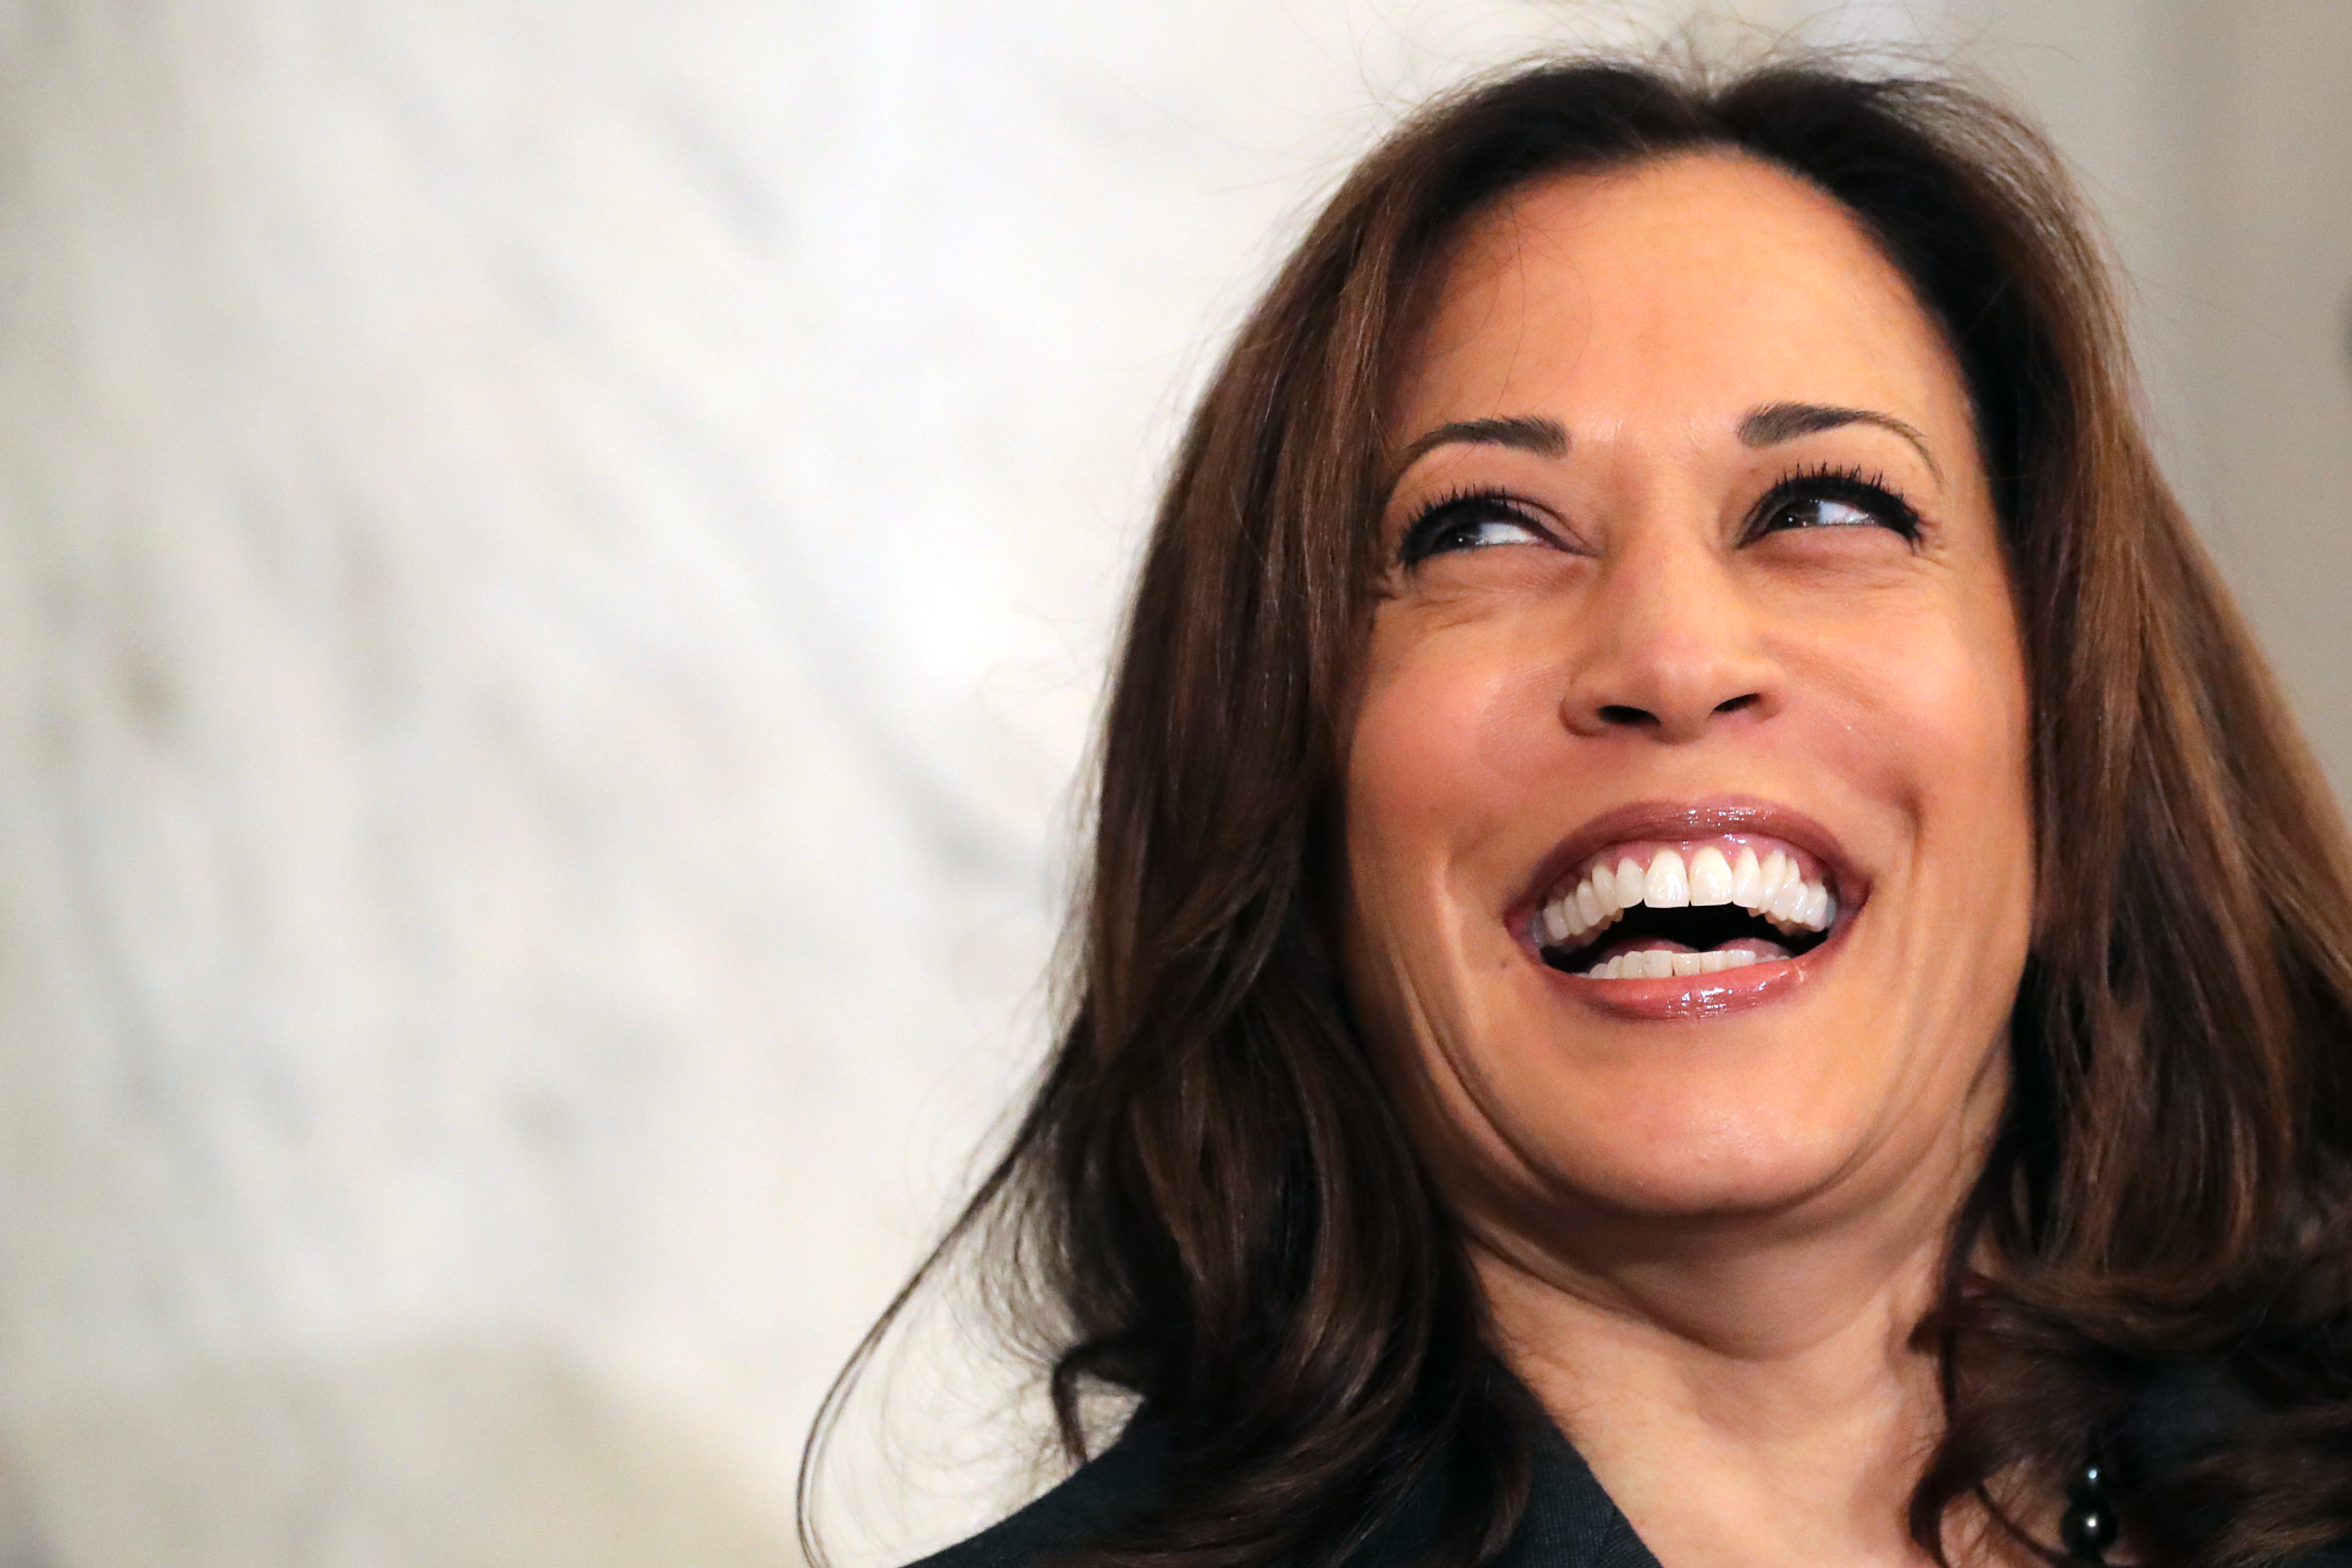 Sen. Kamala Harris (D-CA) attends a post-midterm election meeting of Rev. Al Sharpton's National Action Network in the Kennedy Caucus Room at the Russell Senate Office Building on Capitol Hill November 13, 2018 in Washington, DC. (Chip Somodevilla—Getty Images)